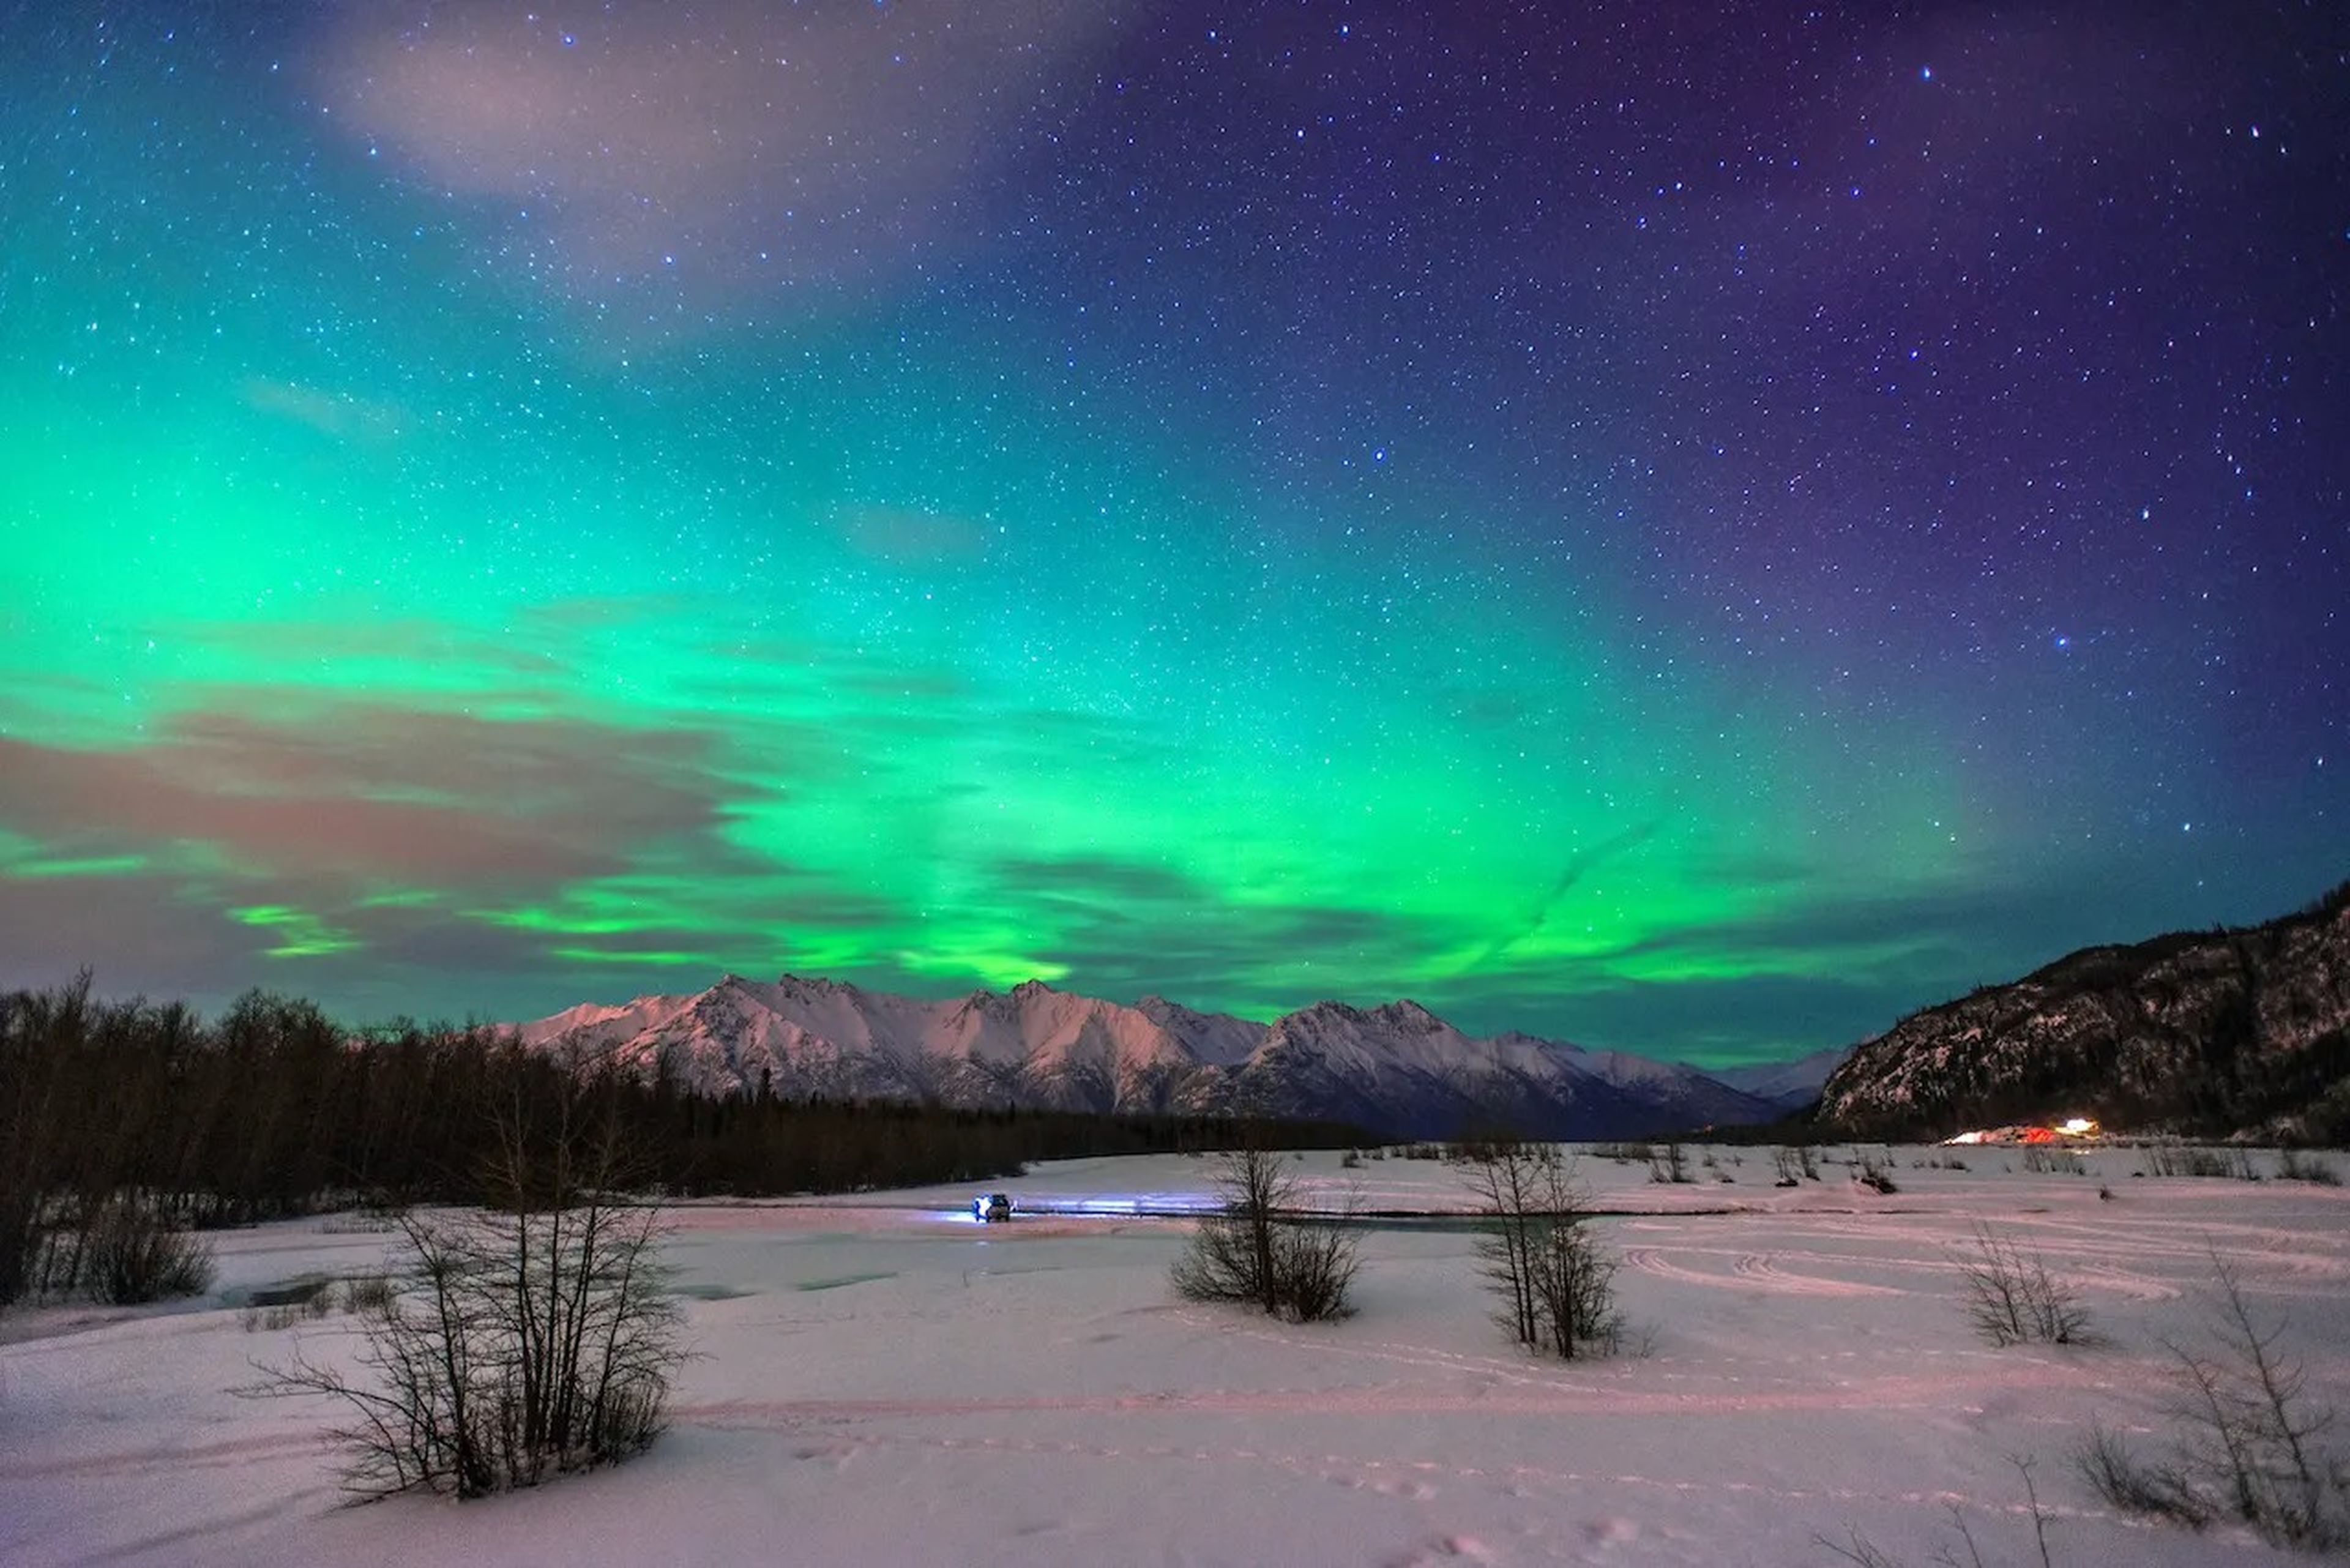 You can see the Northern Lights in Alaska.